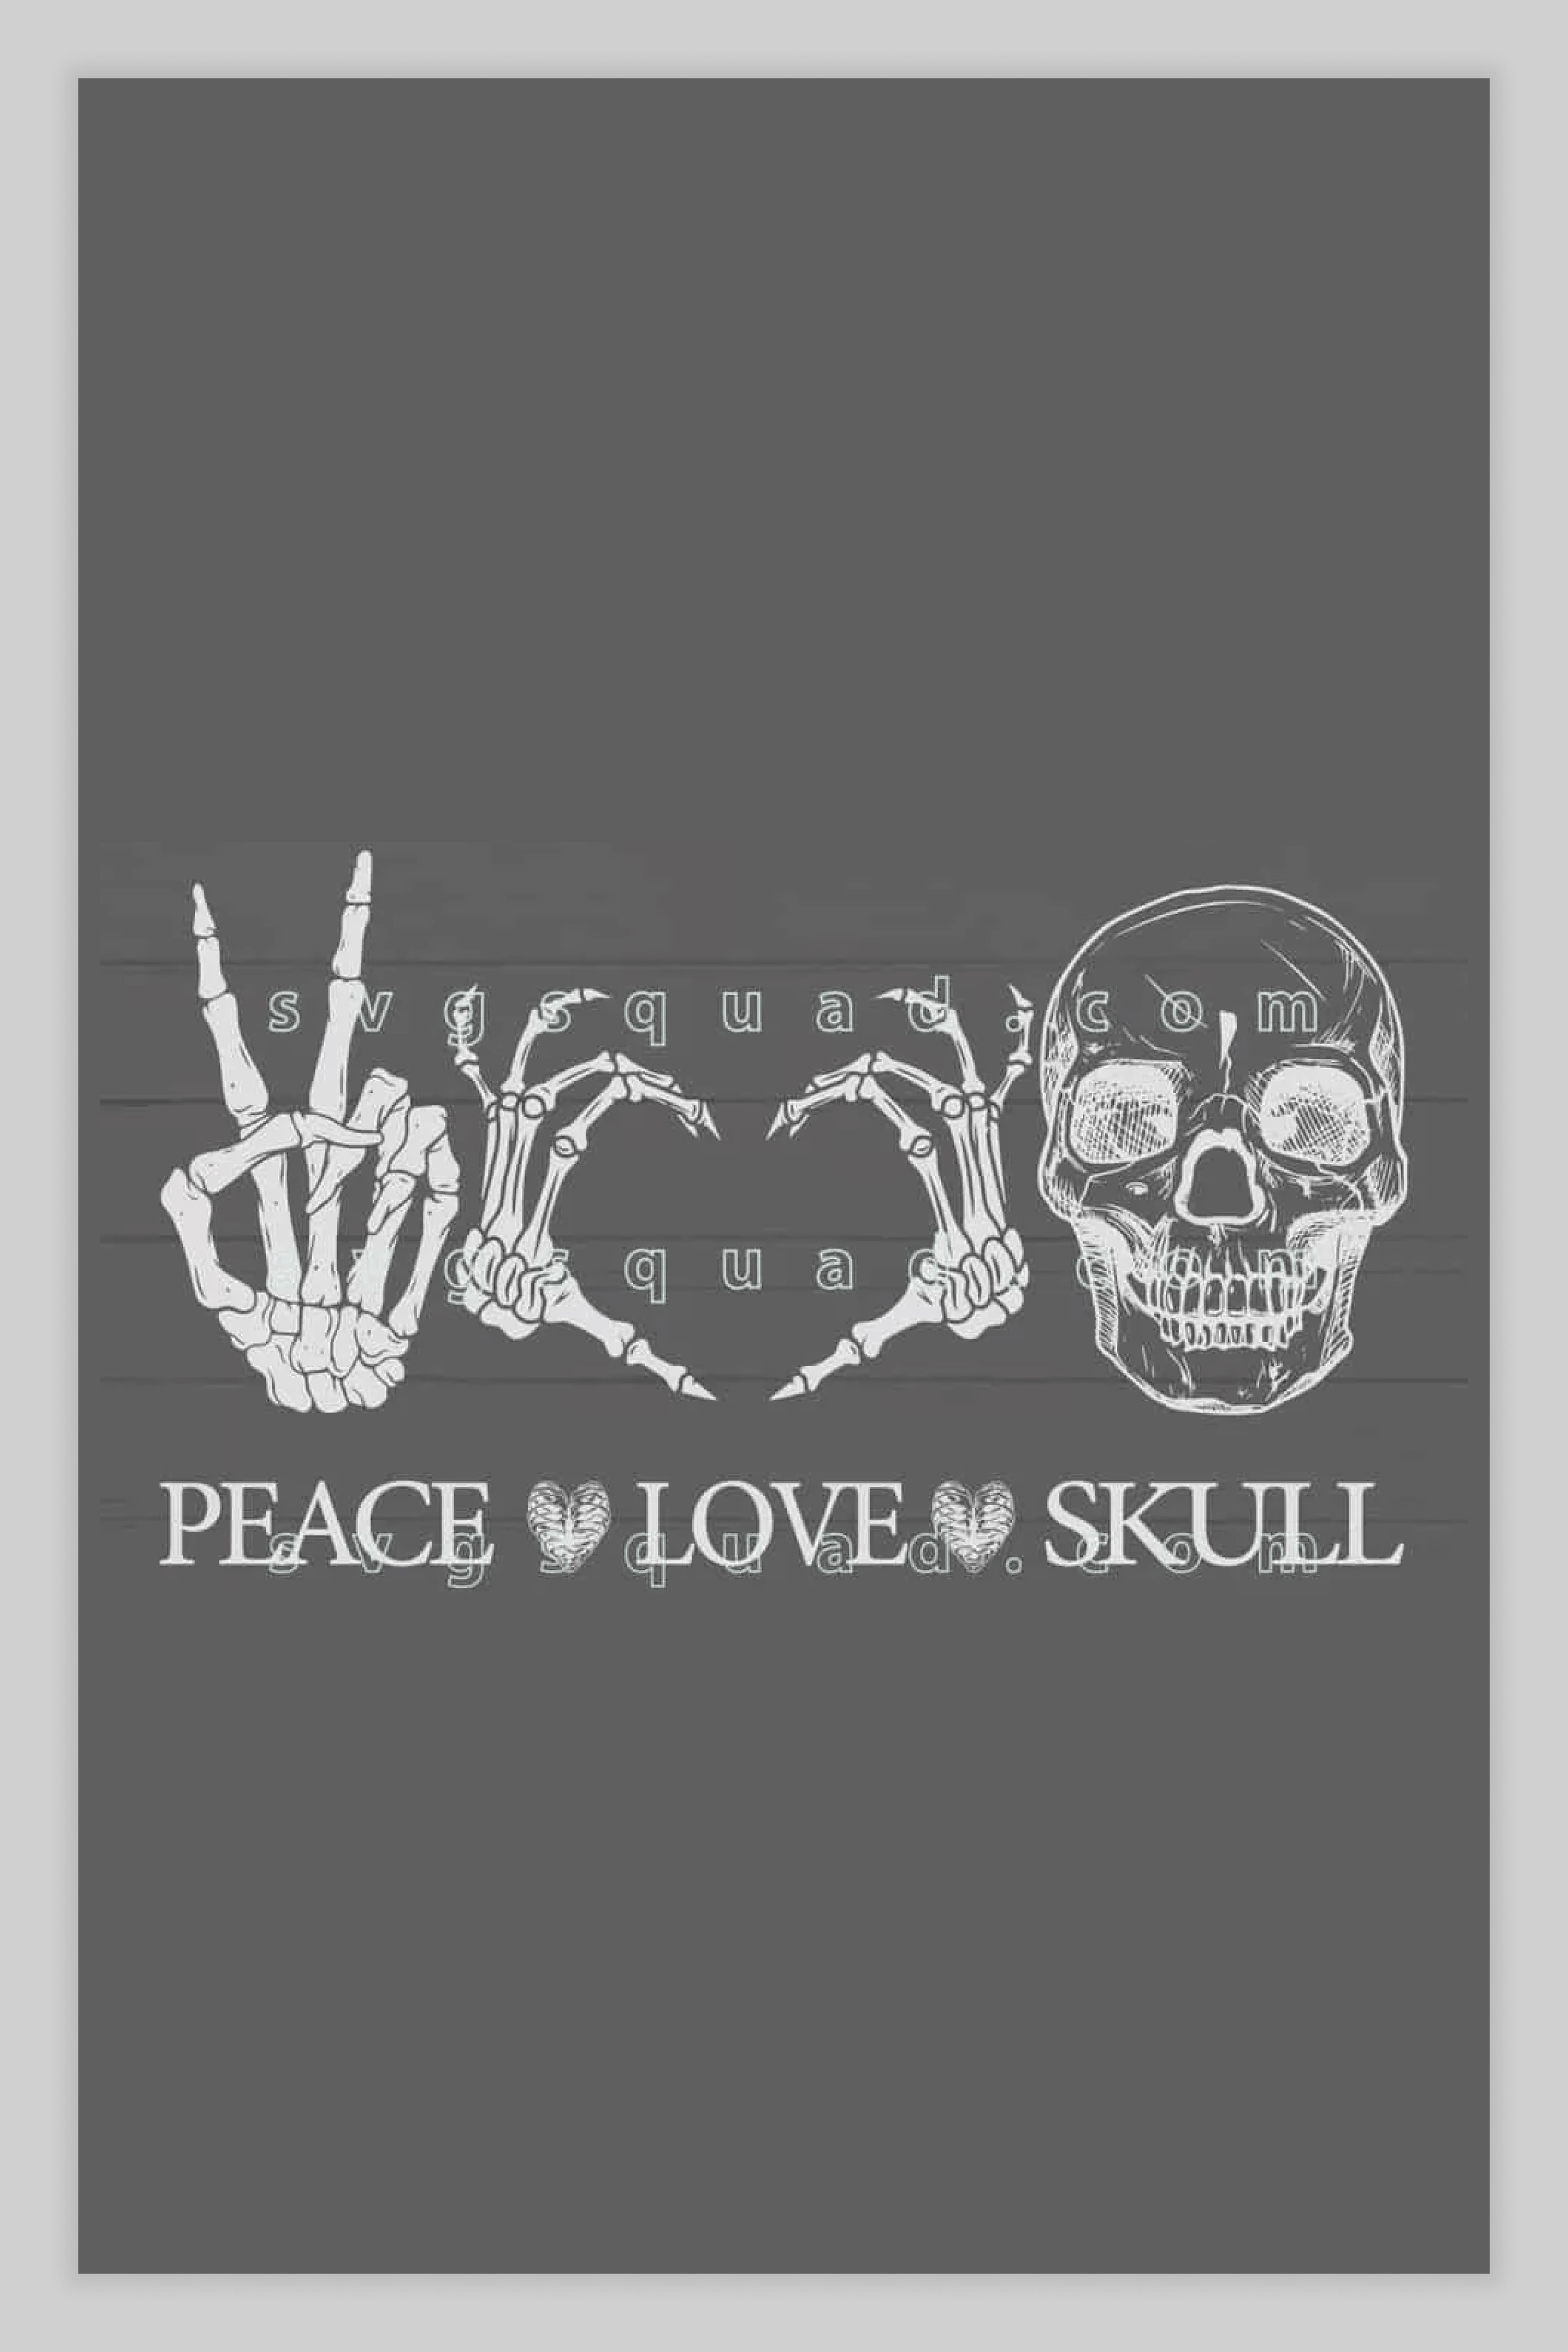 Image of symbols of peace and love in the form of fingers of a skeleton and a skull.